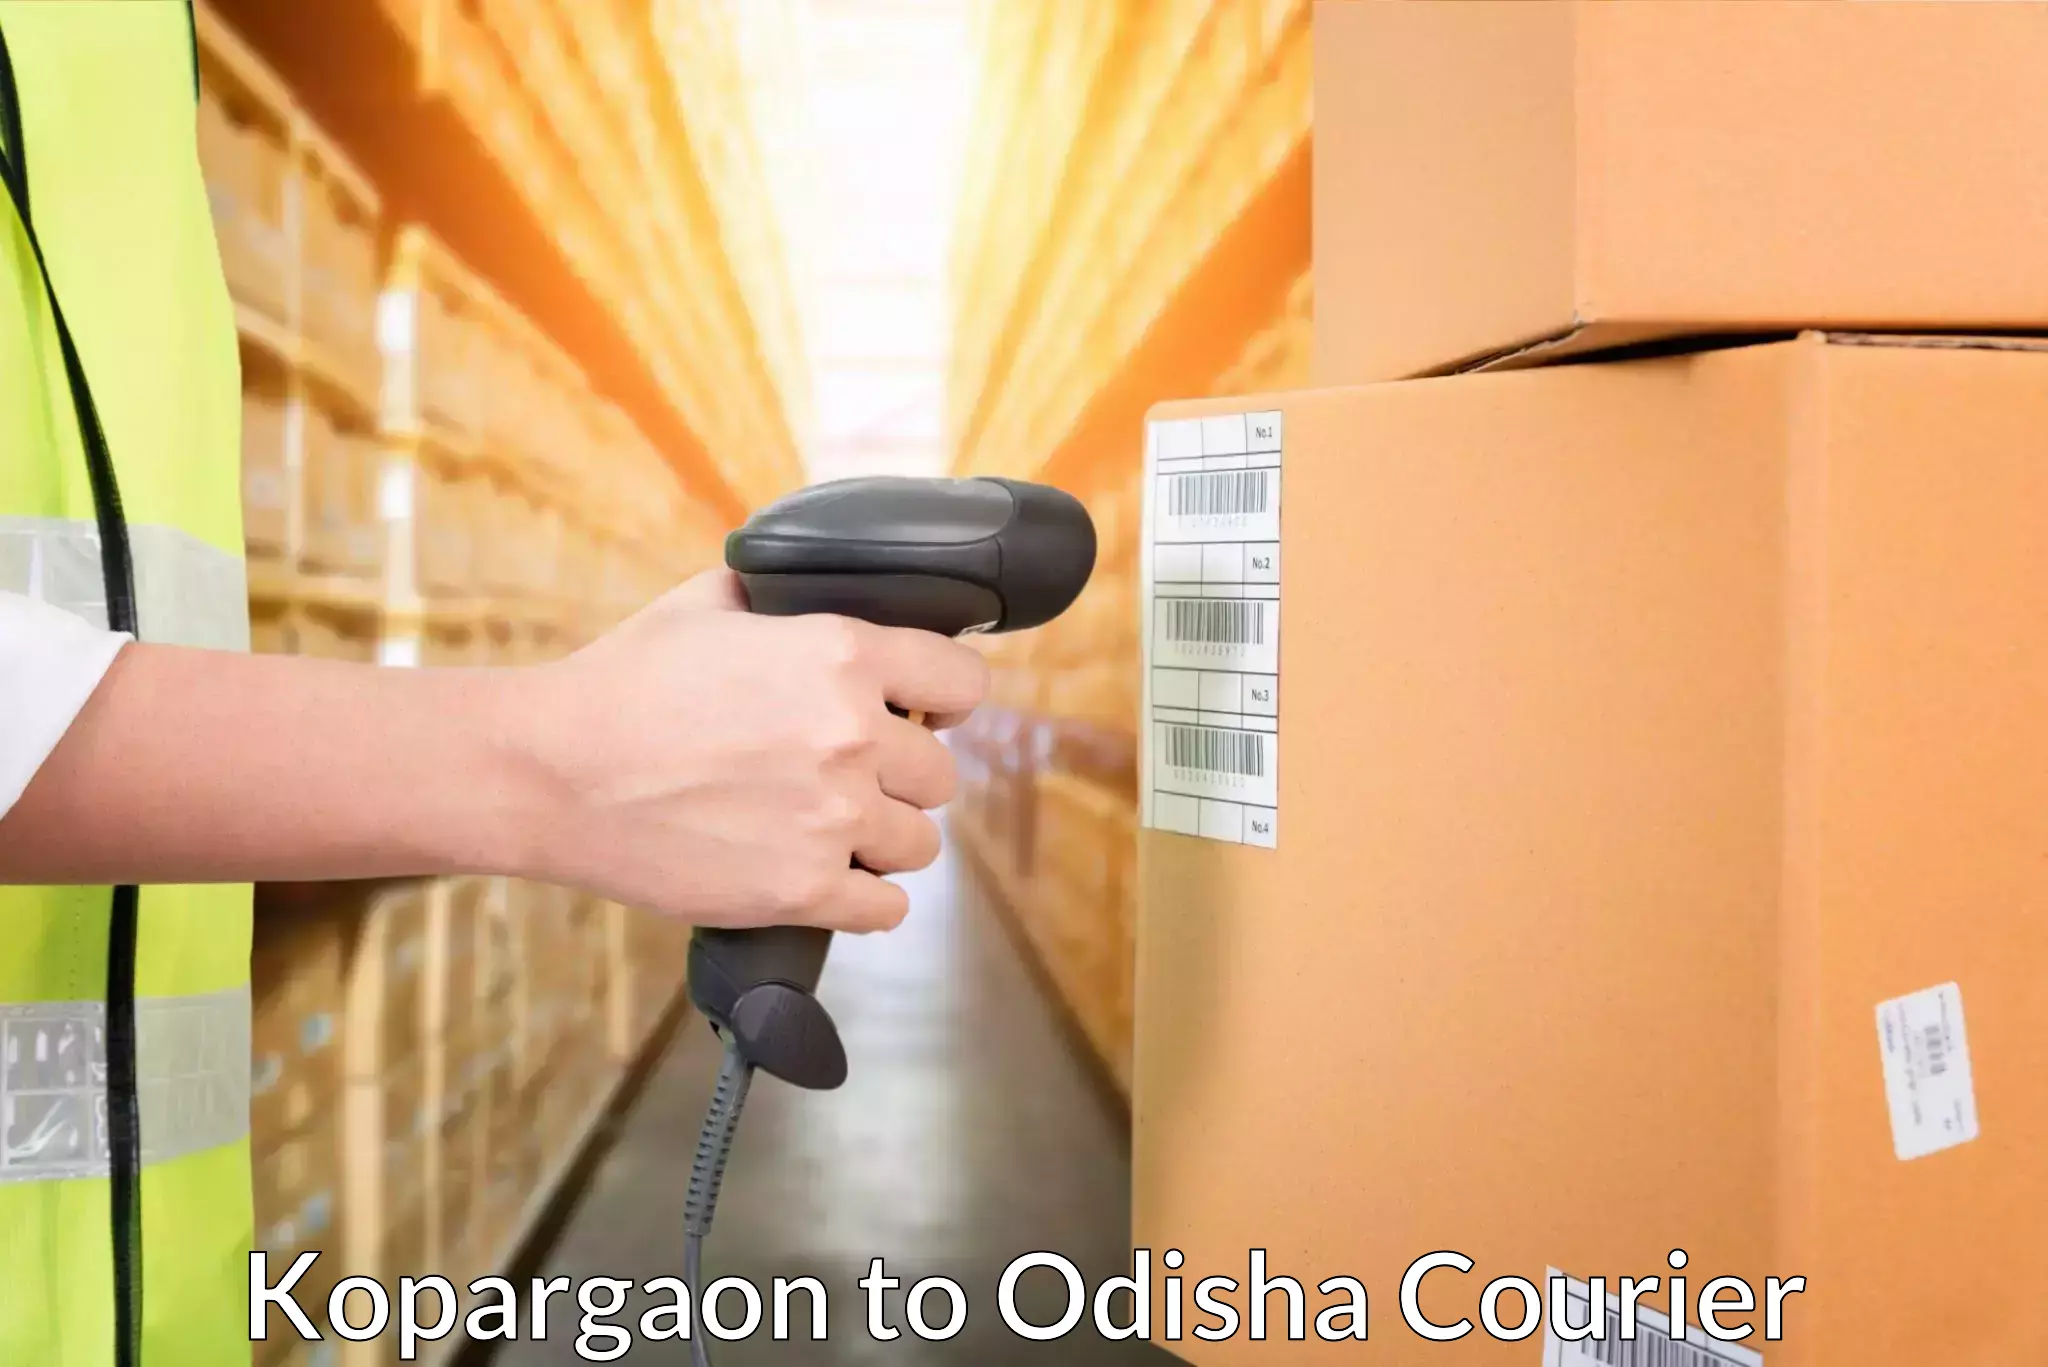 Next-day delivery options in Kopargaon to Nabarangpur